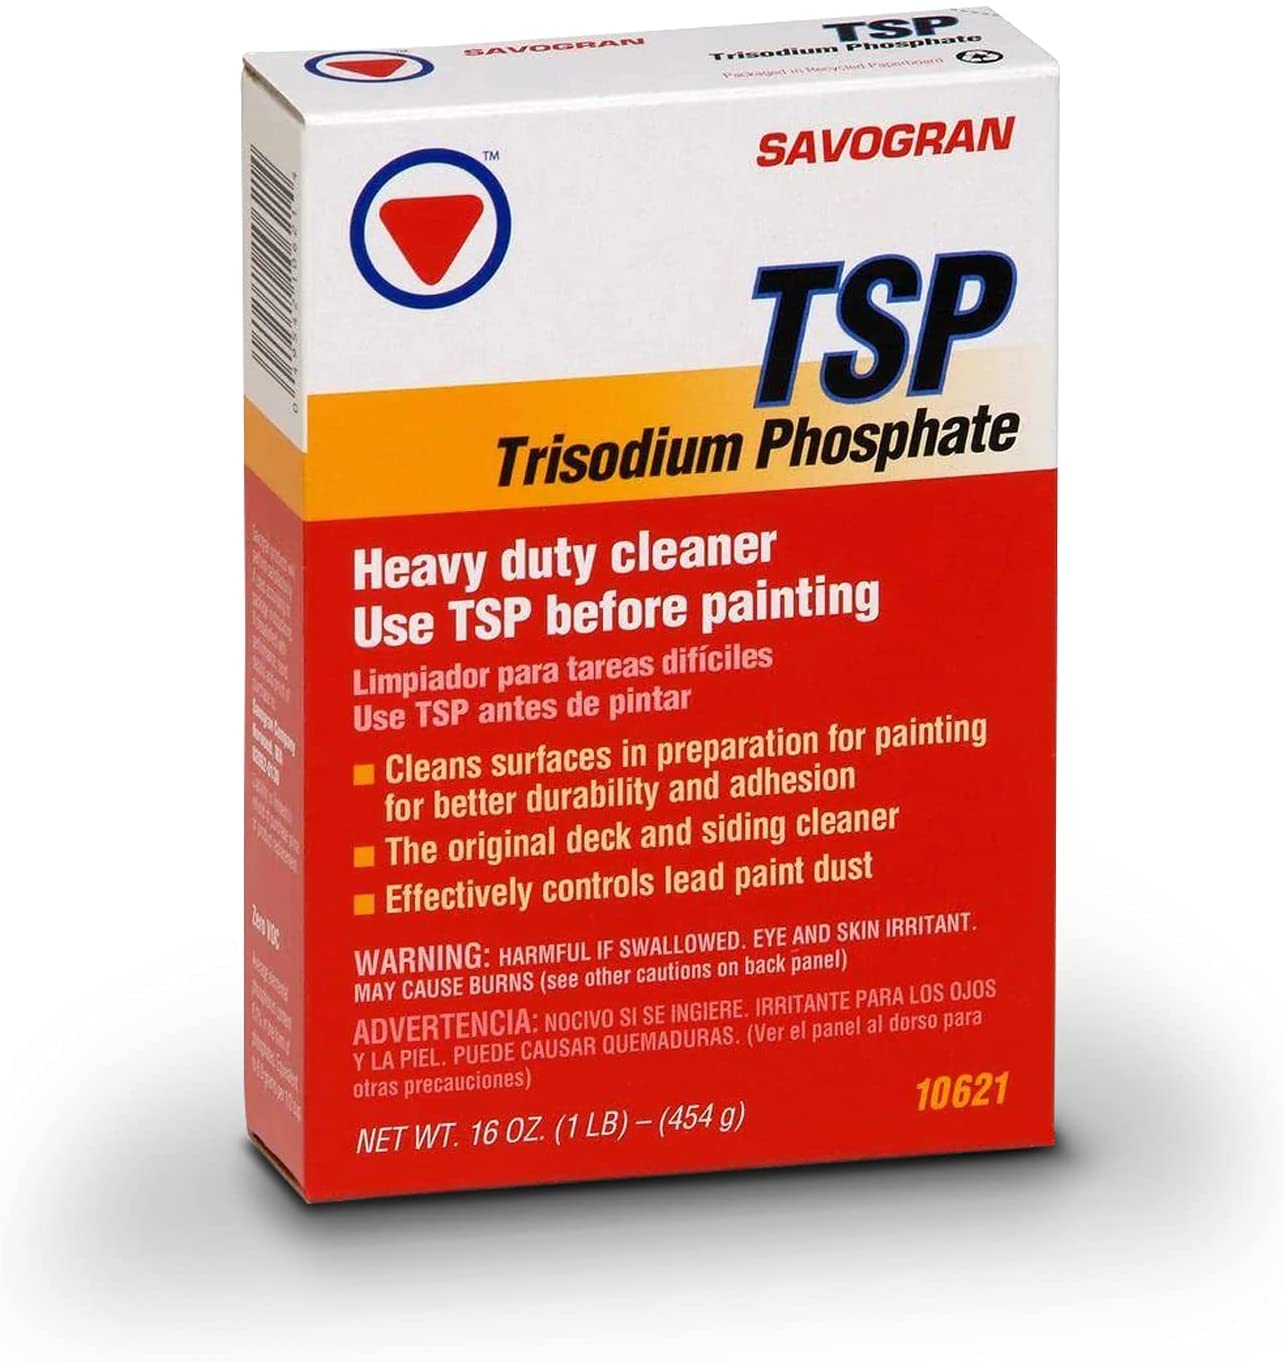 Savogran TSP Trisodium Phosphate Heavy duty Cleaner Use TSP Before Painting 16oz 10621 1-LB